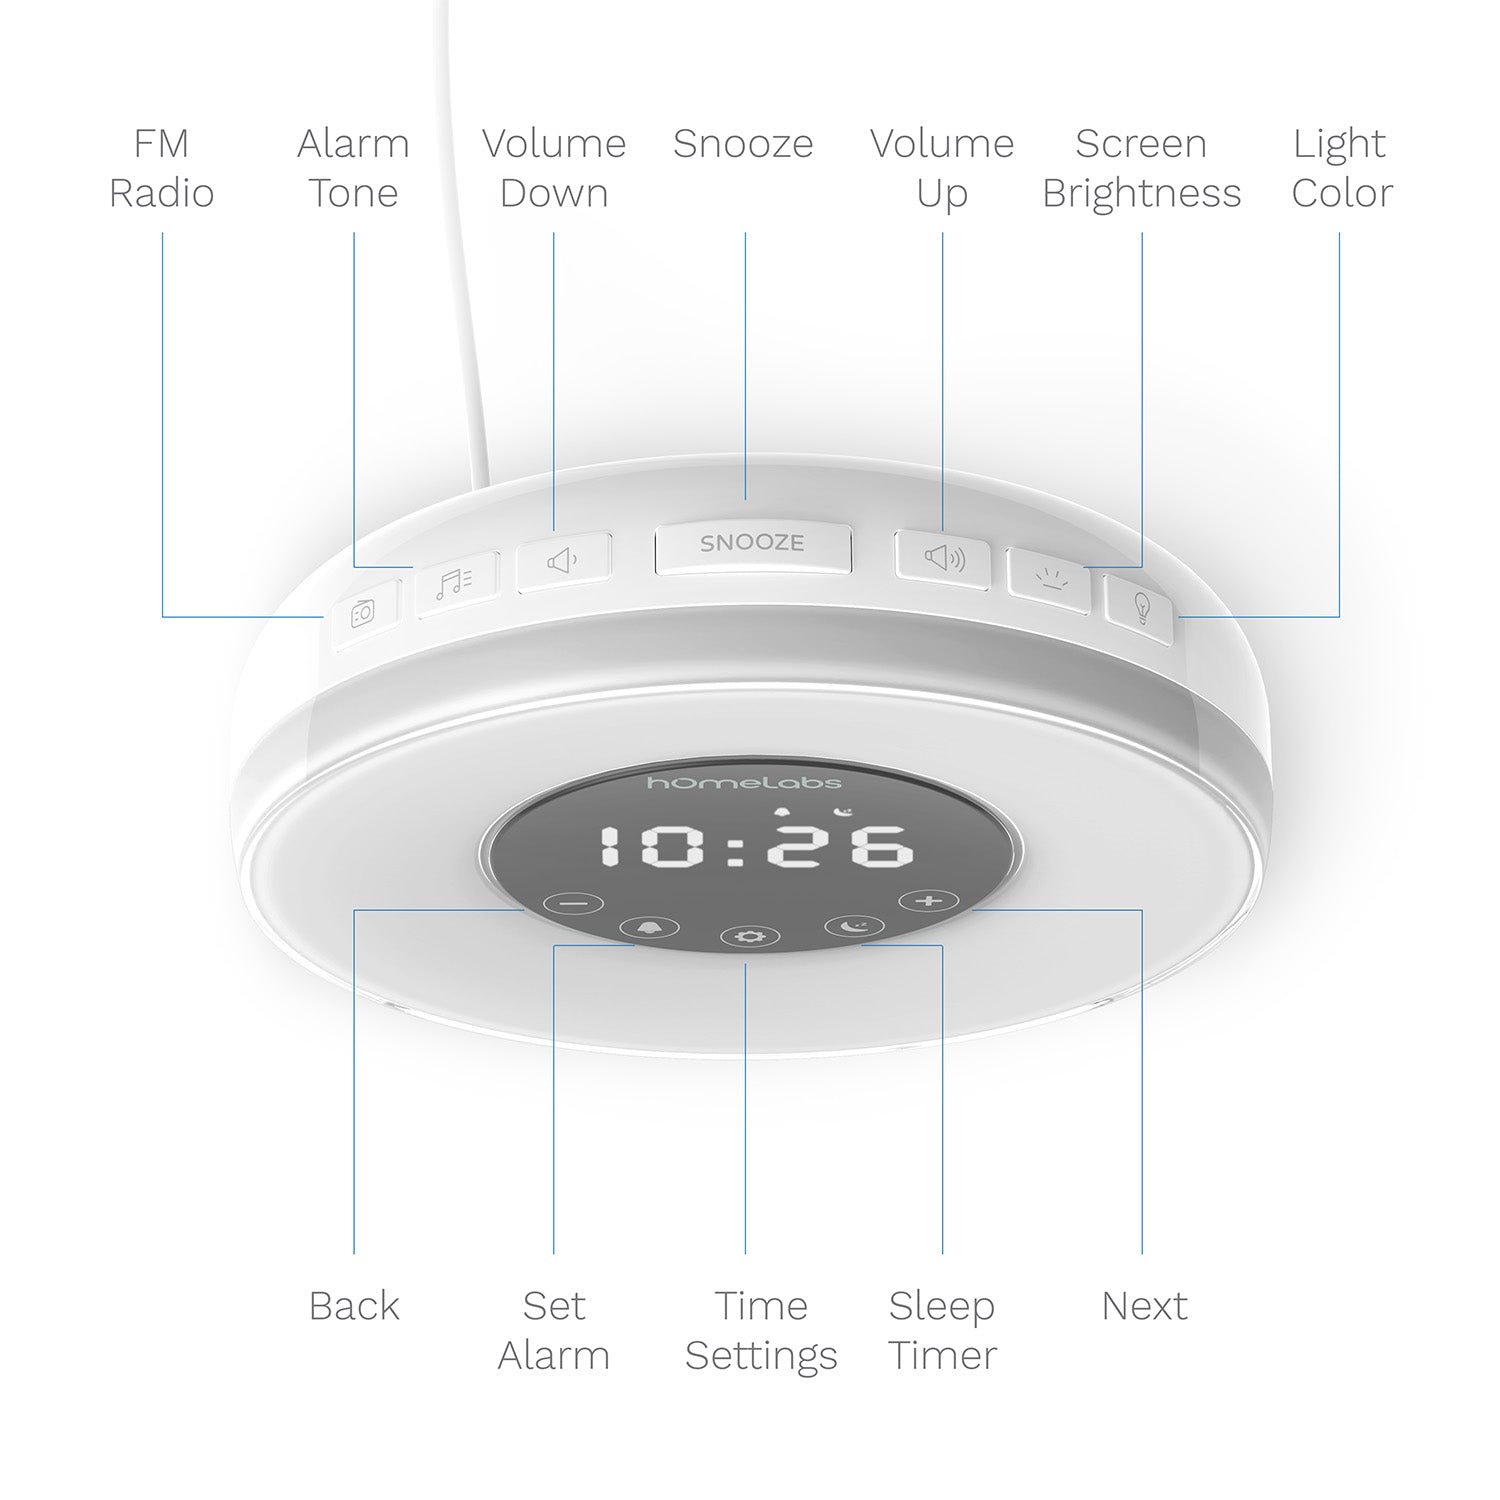 hOmeLabs Sunrise Alarm Clock - Digital LED Clock with 6 Color Switch and FM Radio for Bedrooms - Multiple Nature Sounds Sunset Simulation & Touch Control - with Snooze Function for Heavy Sleepers - image 2 of 9